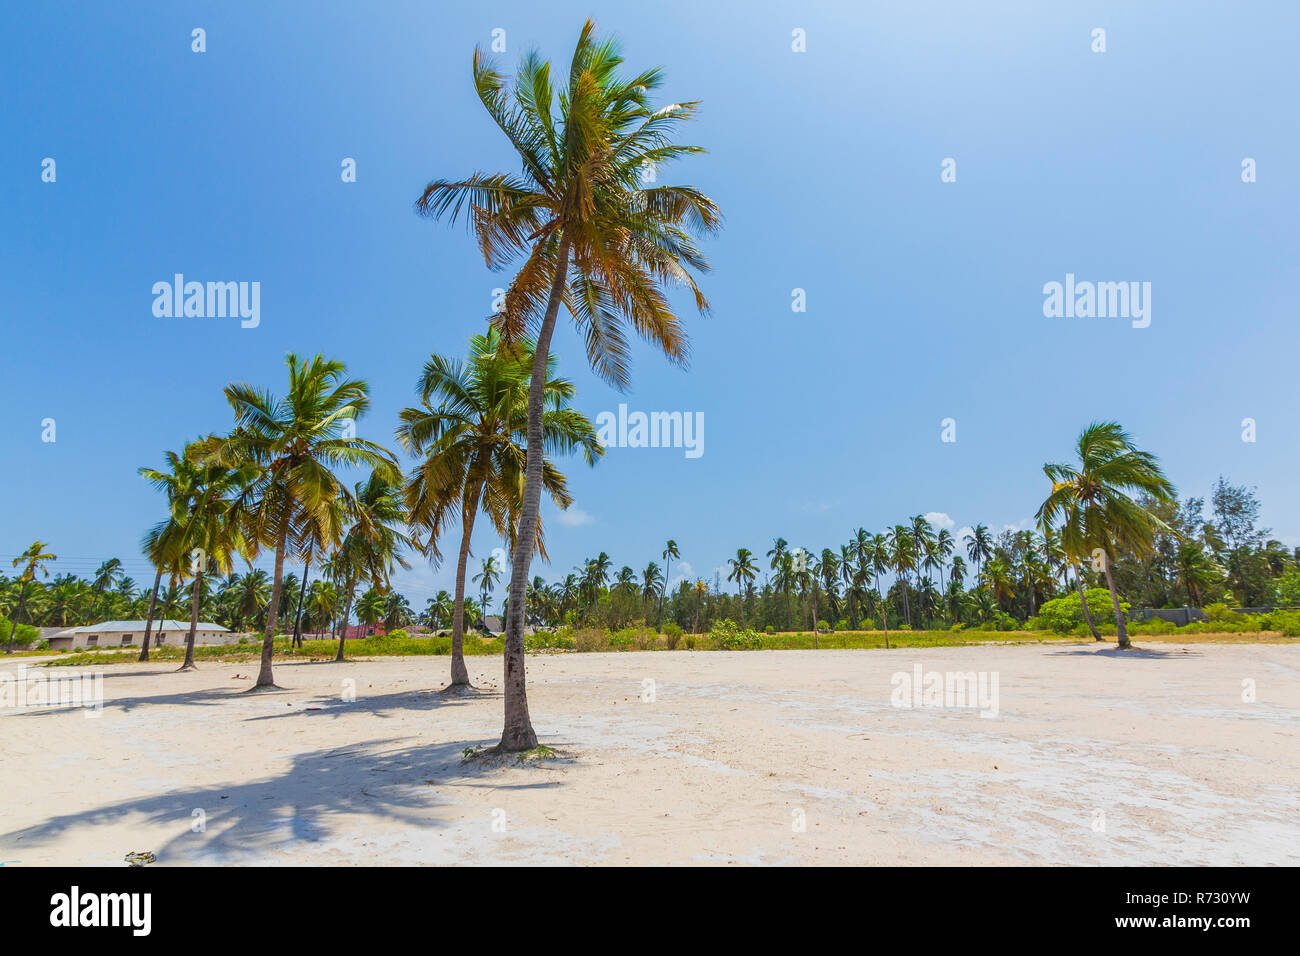 Attractive tropical outback landscape with high palm trees in white sand against a clear blue sky and a small village in the background Stock Photo